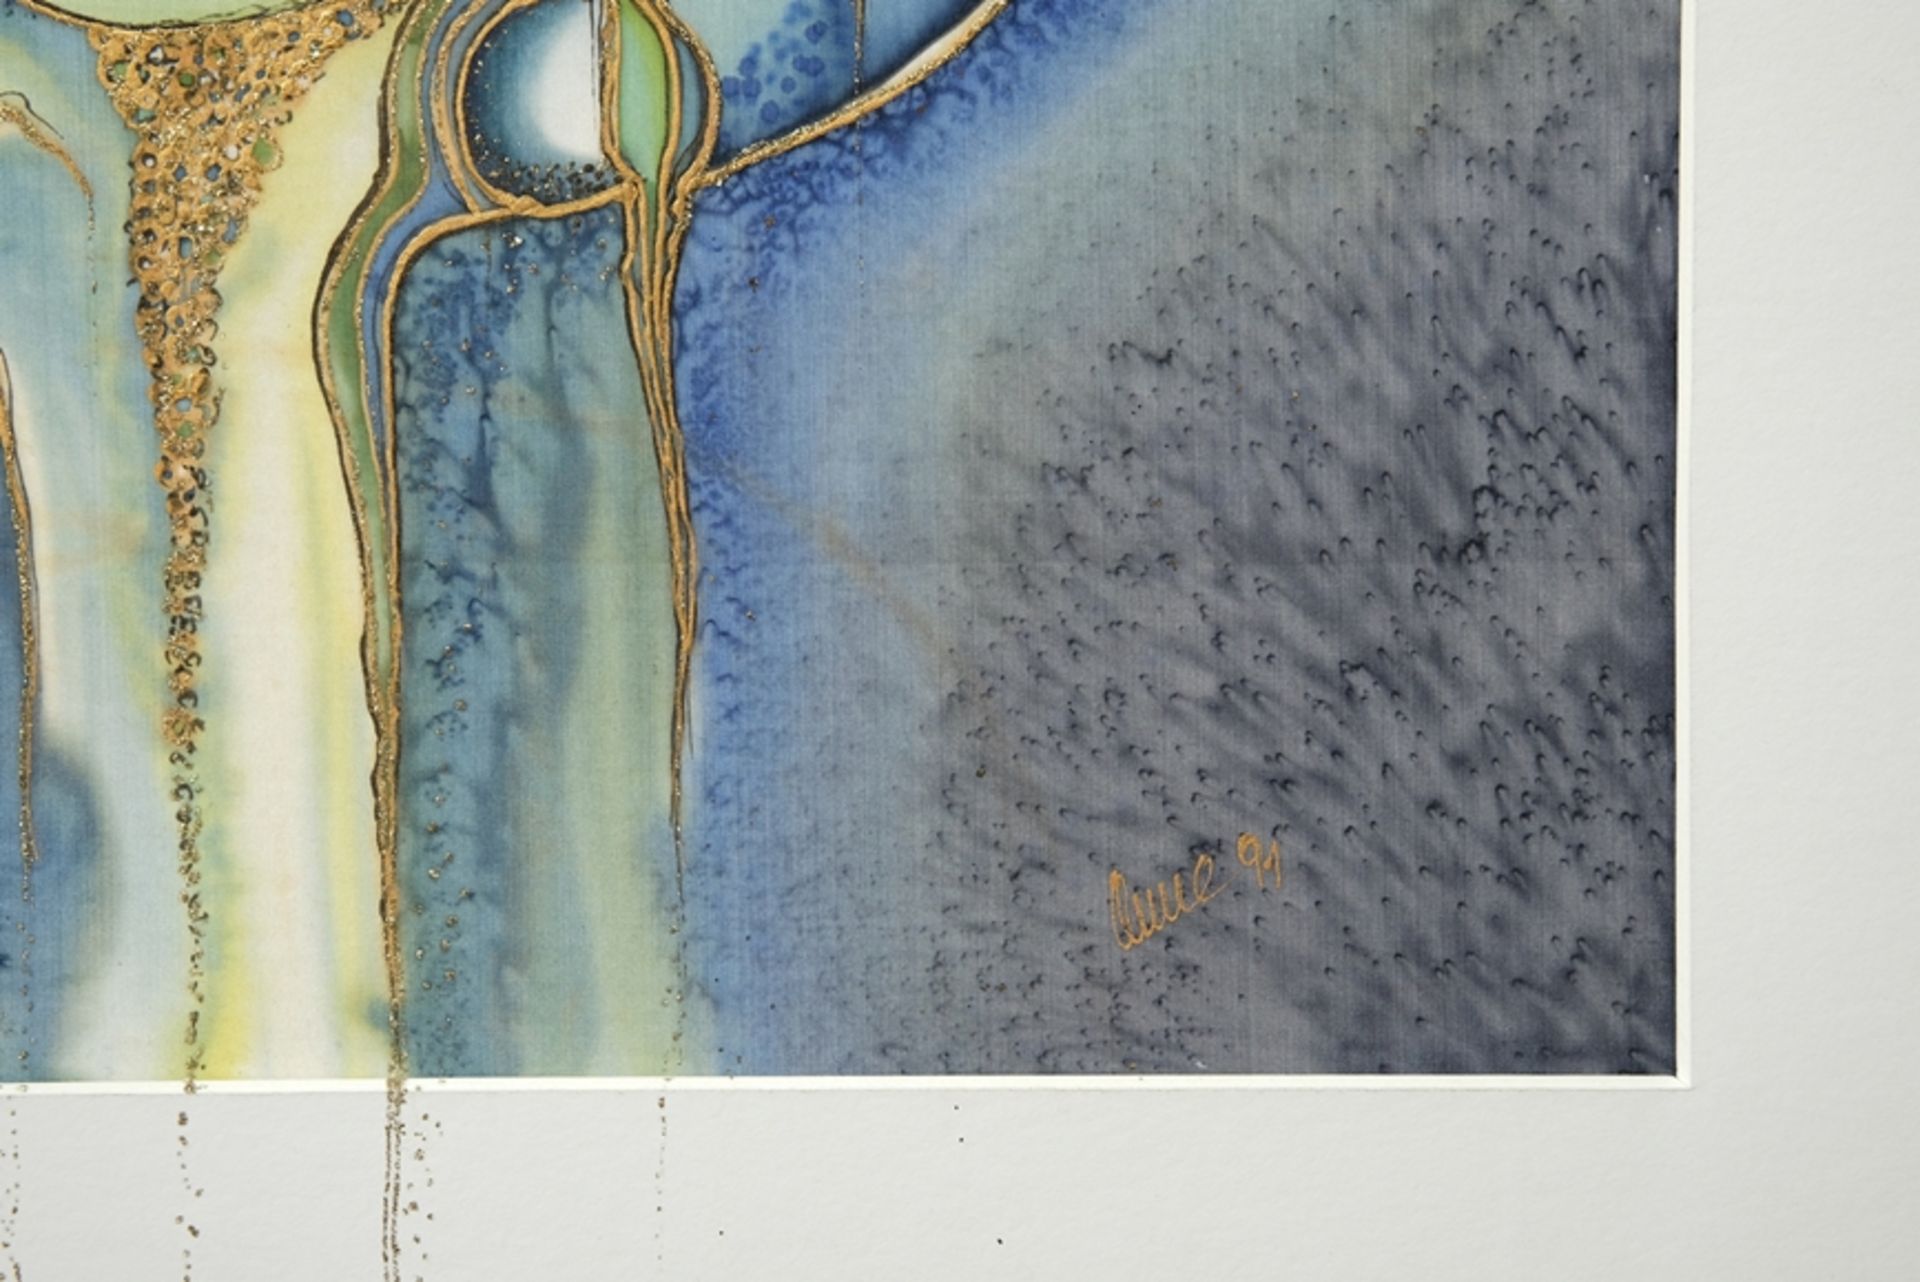 Geiger, Anne (born 1933) Untitled, 1991, mixed media on canvas. - Image 3 of 3